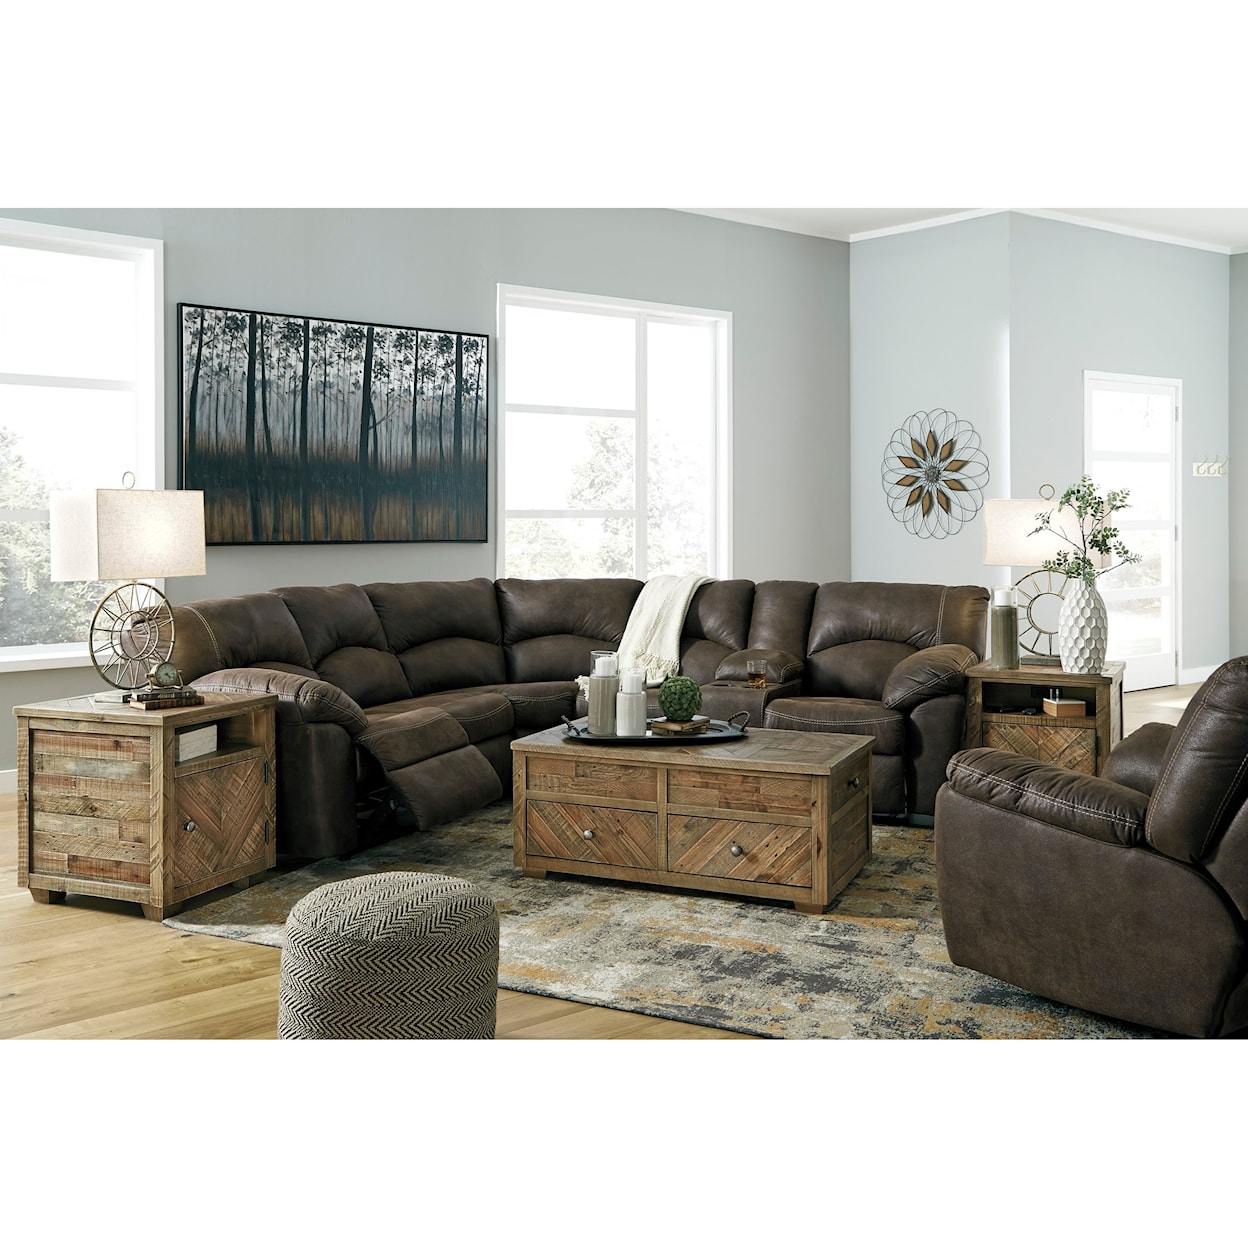 Signature Design by Ashley Furniture Tambo 2-Piece Reclining Corner Sectional